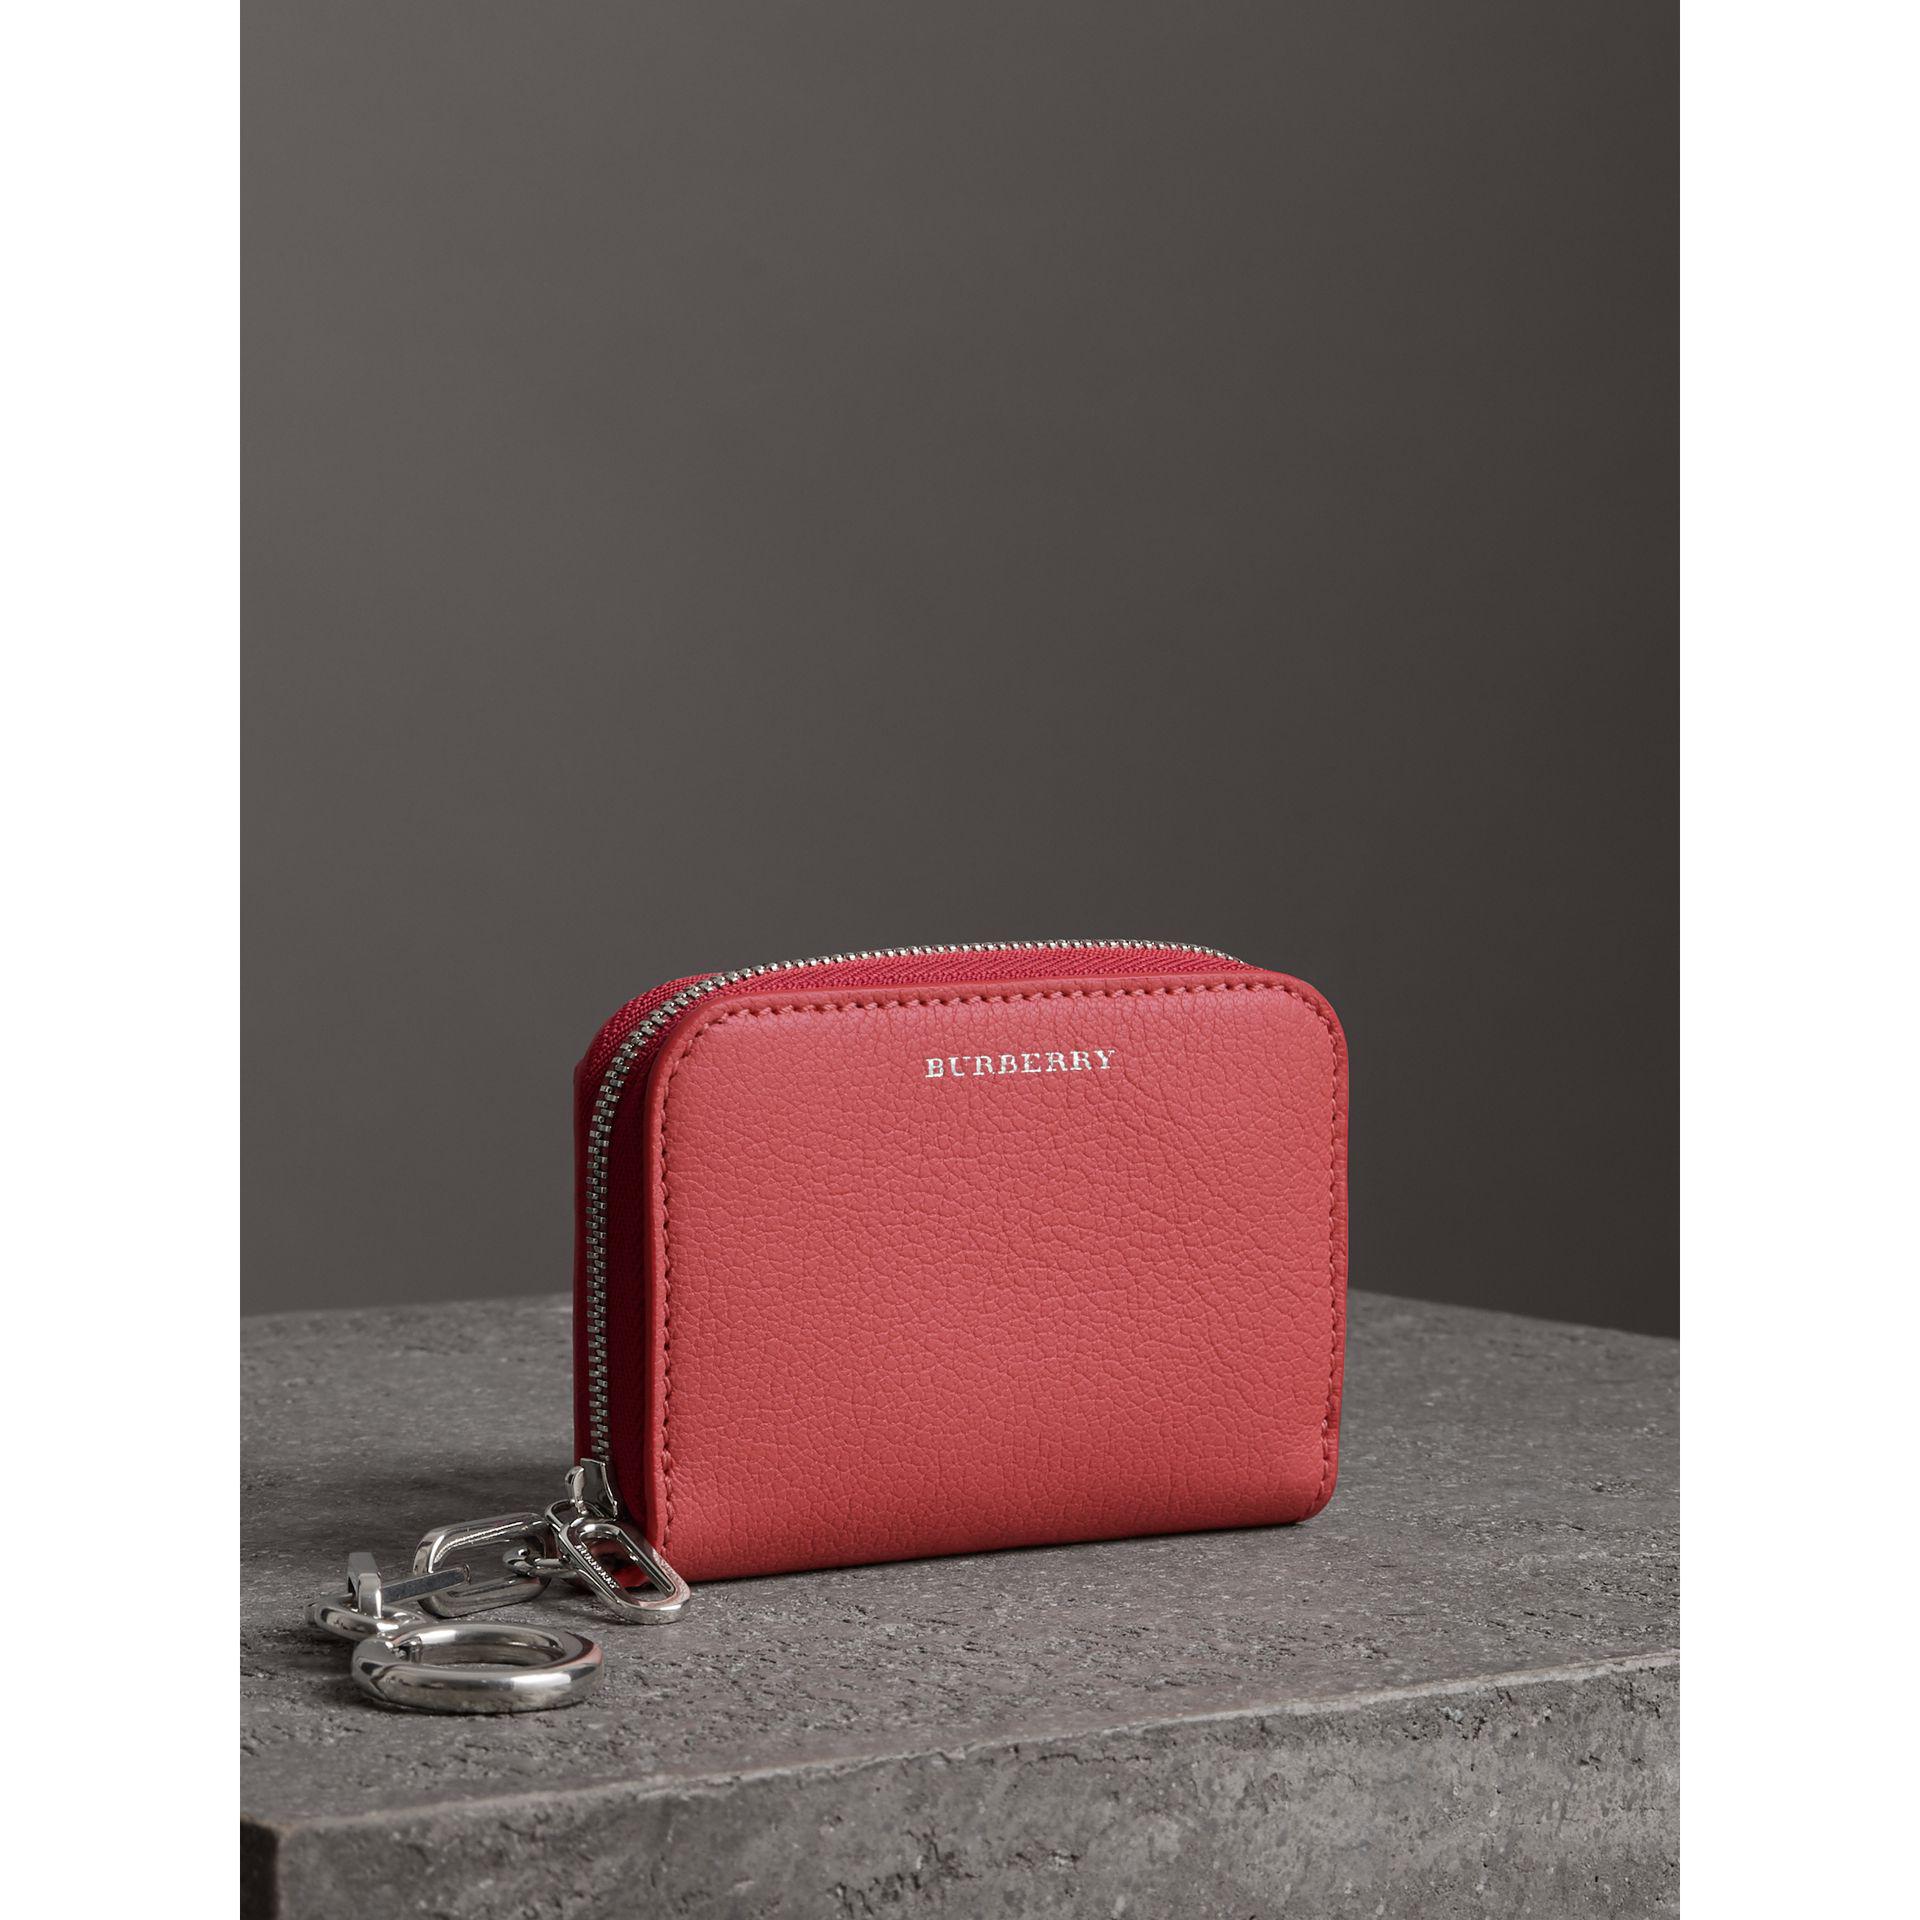 burberry link detail leather ziparound wallet